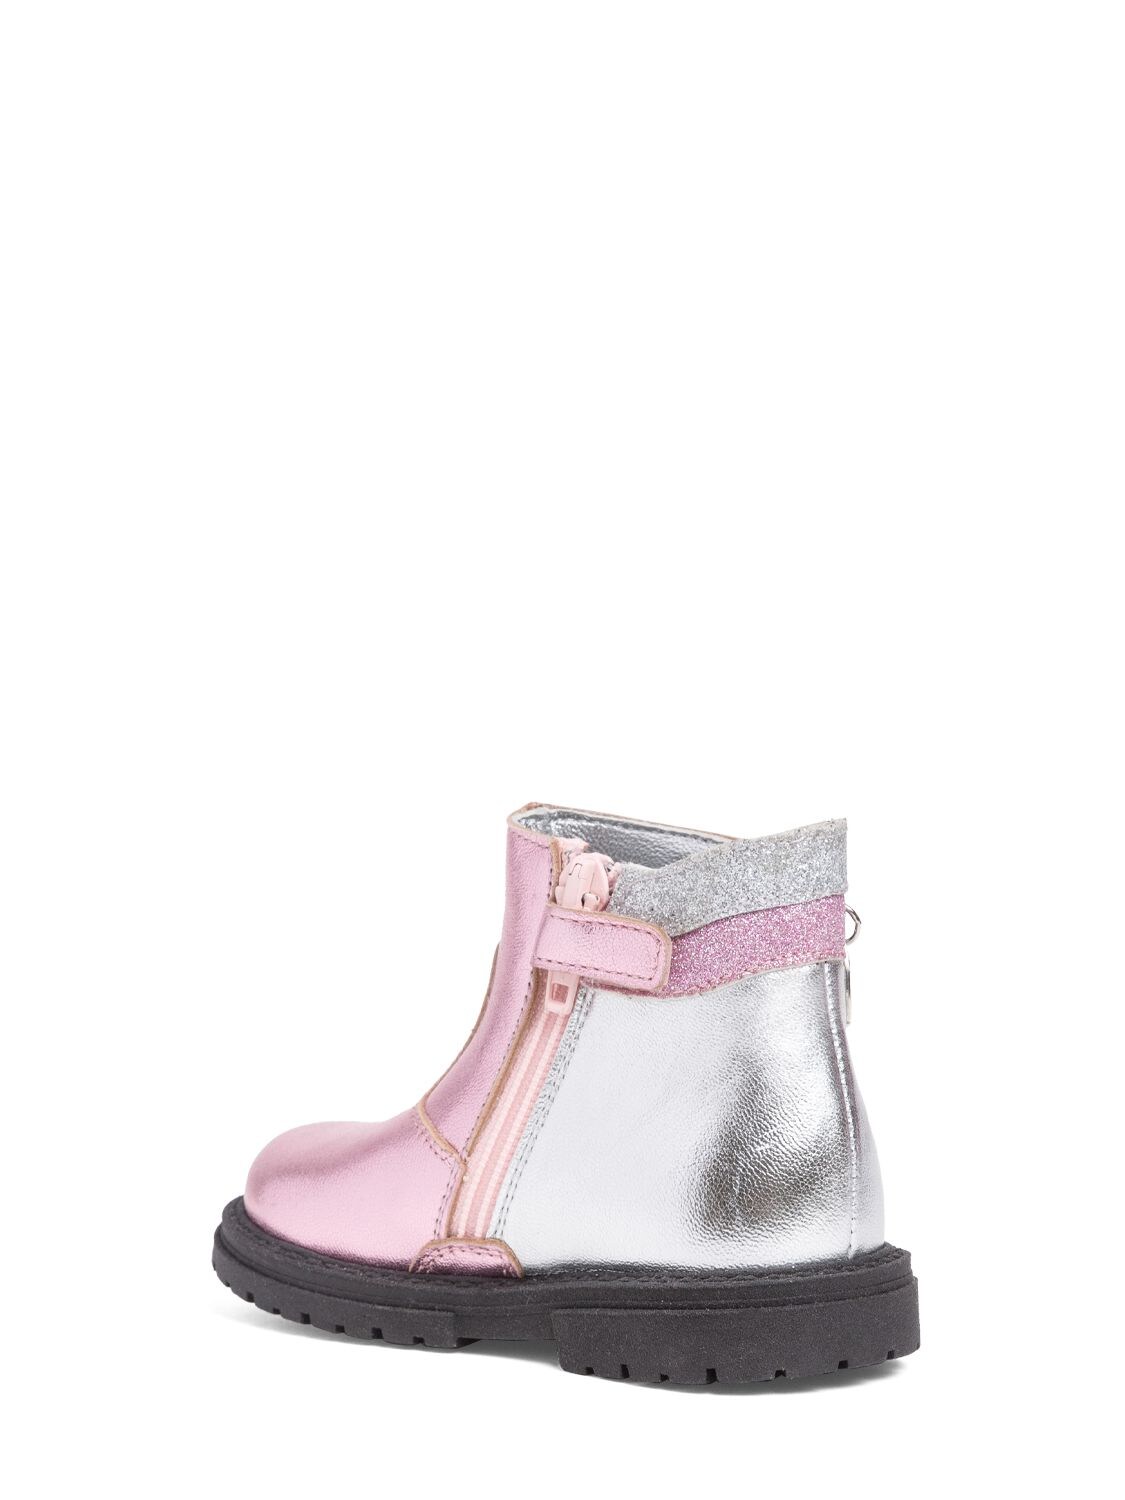 Shop Monnalisa Laminated Leather Boots In Pink